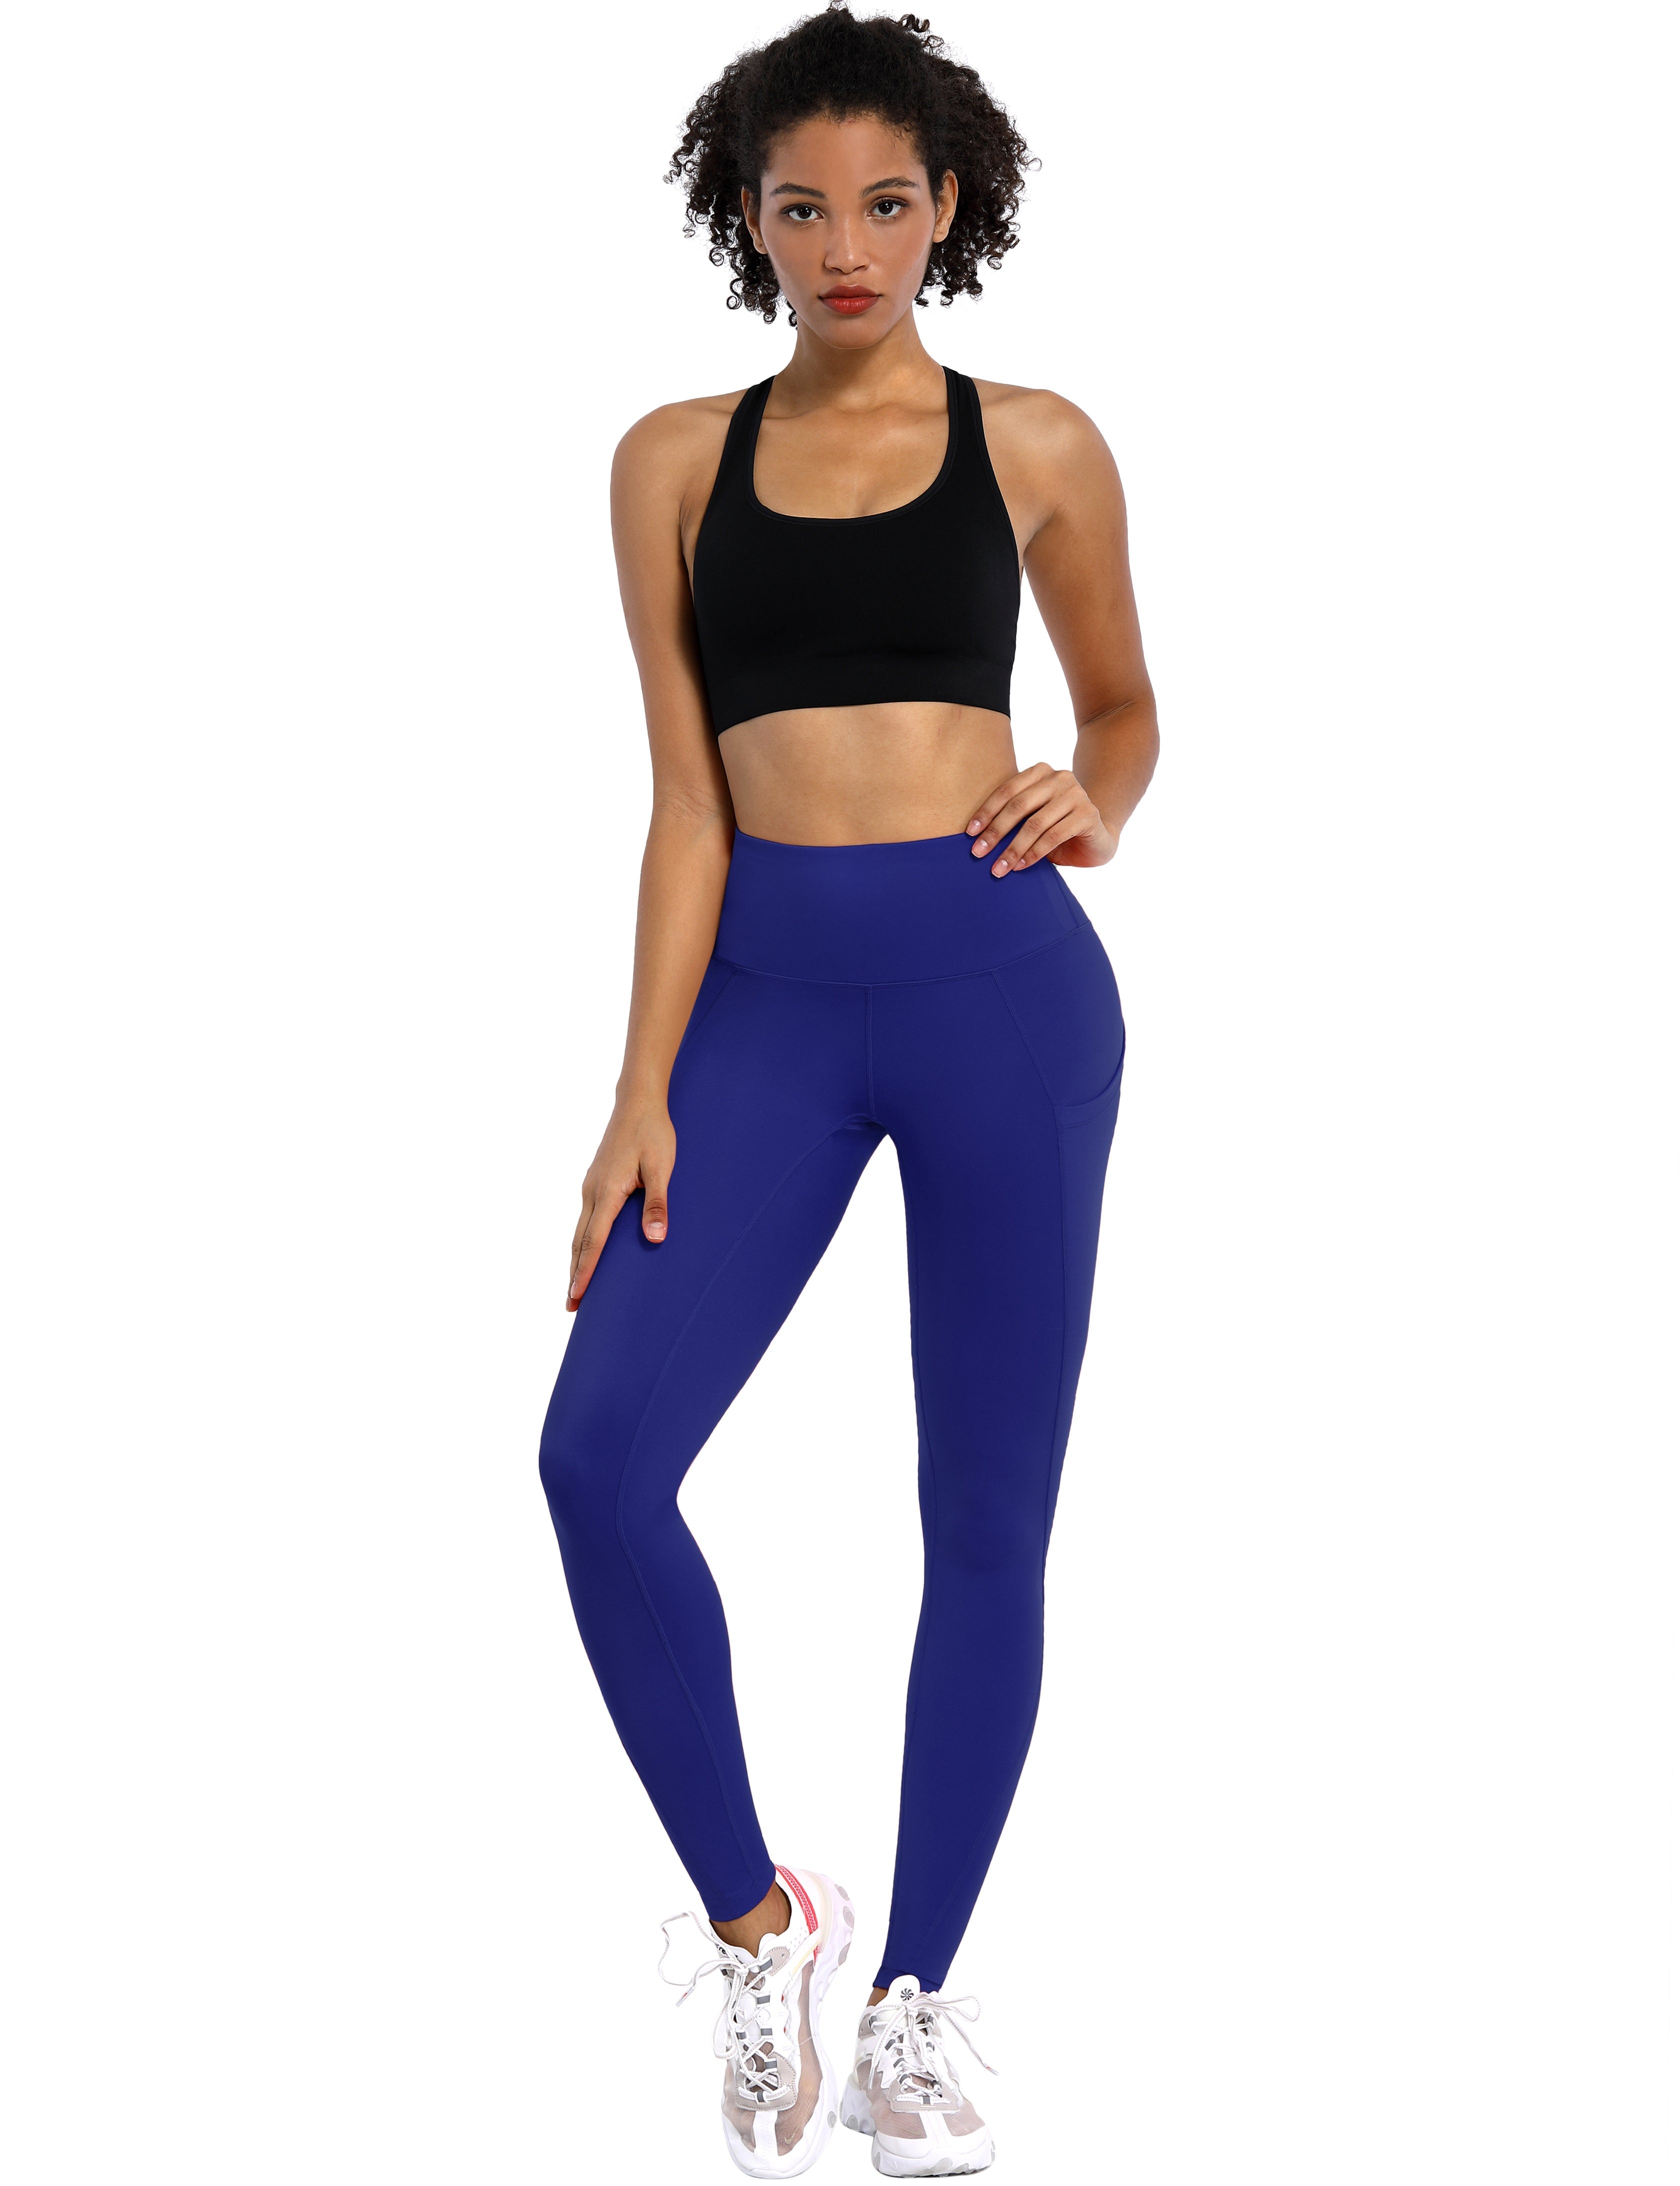 High Waist Side Pockets Tall Size Pants navy 75% Nylon, 25% Spandex Fabric doesn't attract lint easily 4-way stretch No see-through Moisture-wicking Tummy control Inner pocket